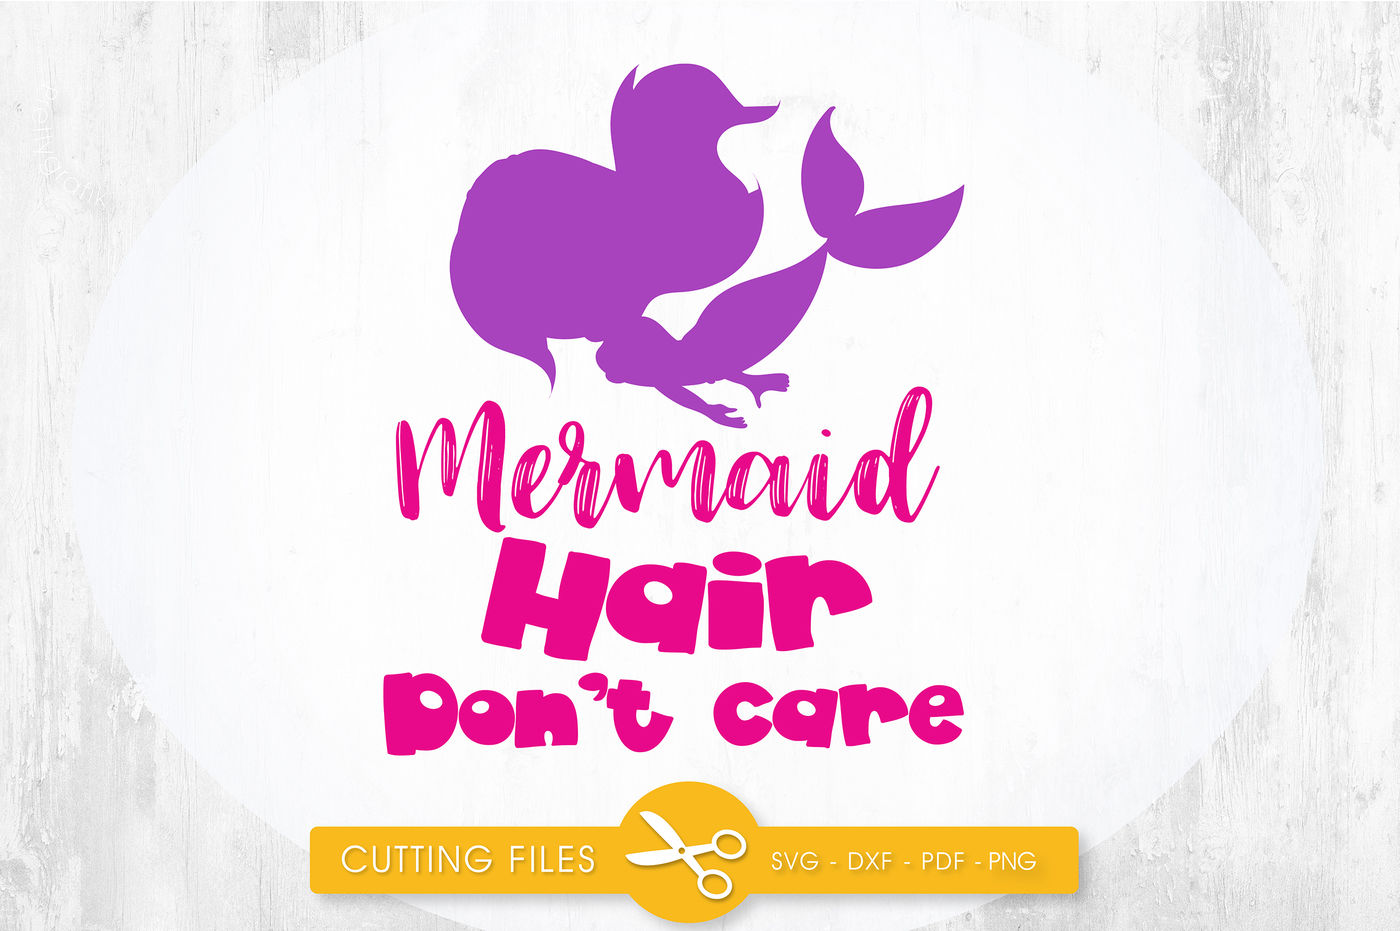 ori 3464961 44dd26b4216f8a49bac1c1d5b968ba94f76e9995 mermaid hair don t care svg png eps dxf cut file